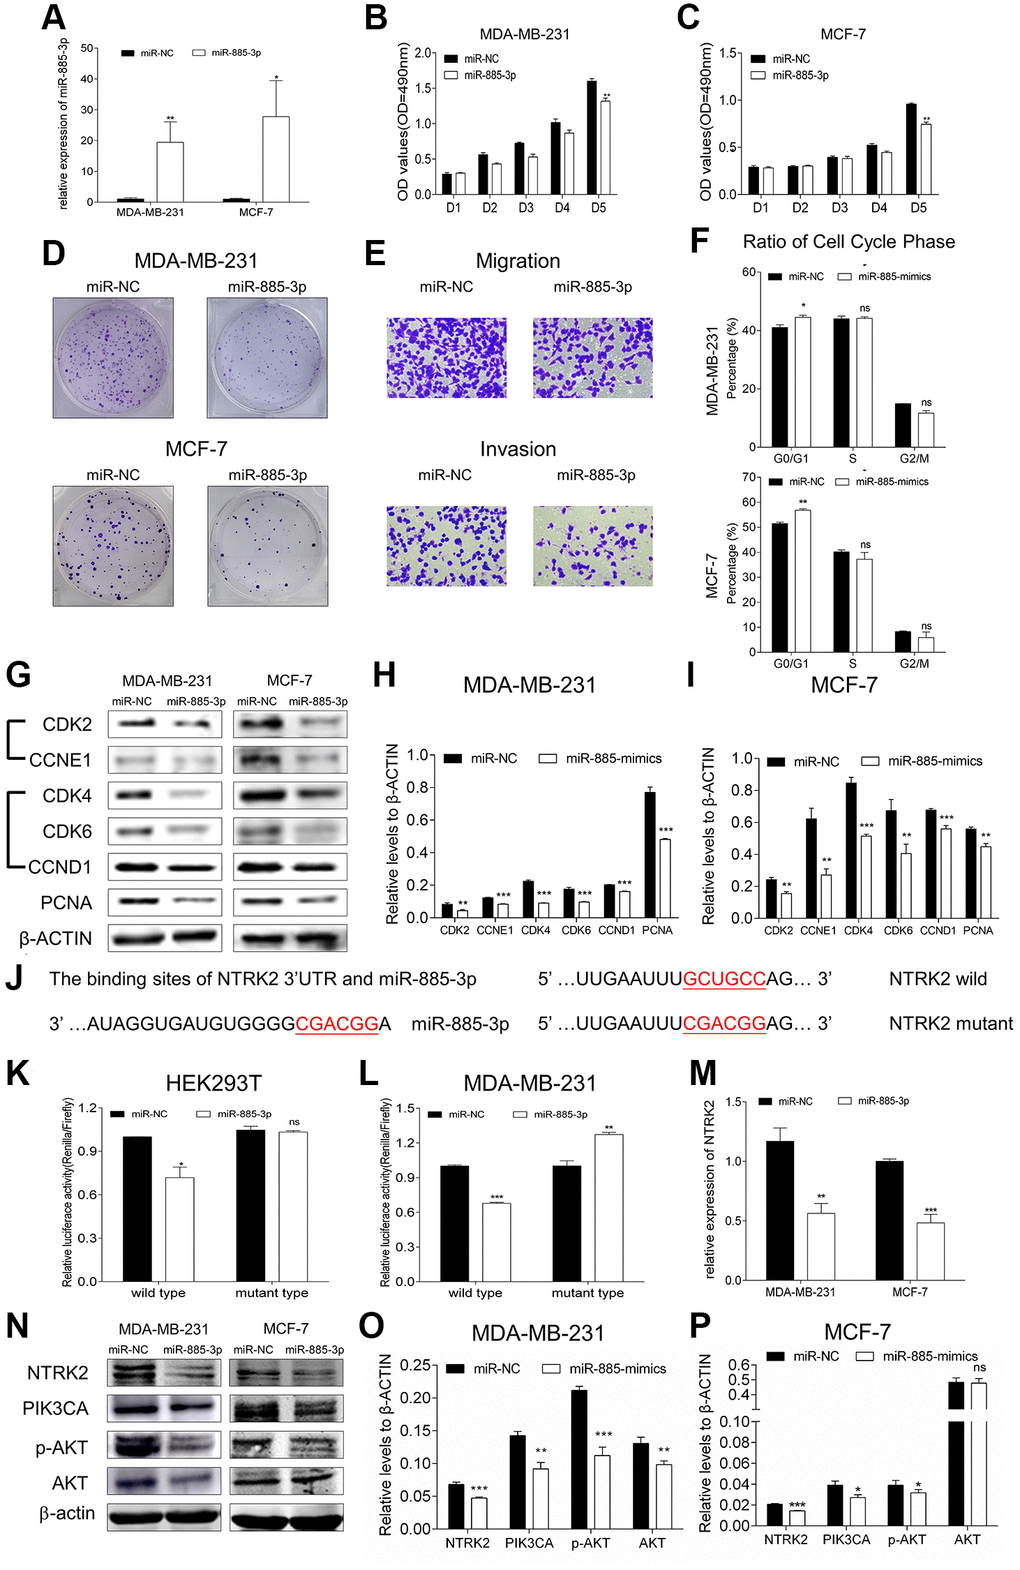 MiR-885-3p suppressed the proliferation of breast cancer and targeted NTRK2 to affect the PIK3CA/AKT signaling pathway. (A) The transfection efficiency of miR-885-3p mimics in MDA-MB-231 and MCF-7 cells. (B, C) MTT assays of both cell lines showed that the proliferation was inhibited by overexpression of miR-885-3p. (D) Colony formation assays showed that overexpression of miR-885-3p suppressed both cellular colony-forming capacities. (E) The migration and invasion of MDA-MB-231 cells were suppressed after overexpressing miR-885-3p. (F) Histogram of the percentage of cell cycle distribution of G0/G1, S, and G2/M phases with overexpression of miR-885-3p in both breast cancer cells; miR-885-3p could arrest both cells in G0/G1 phase. (G) Protein levels of CDK2, CCNE1, CDK4, CDK6, CCND1, and PCNA in MDA-MB-231 and MCF-7 cells decreased after increasing the expression of miR-885-3p. (H, I) Columns were used to quantify the cell cycle protein expression levels in (I) relative to β-actin. (J) The predicted wild-type binding sites and designed mutant-type binding sites of miR-885-3p and NTRK2. (K, L) Dual-luciferase reporter assays conducted in HEK293T and MDA-MB-231 cells with miR-885-3p and NTRK2 suggested that miR-885-3p decreased the relative activity of luciferase reporters of the wild-type group. (M) Relative expression of NTRK2 decreased in the MDA-MB-231 and MCF-7 cells overexpressing miR-885-3p. (N) The protein levels of NTRK2, PIK3CA, and p-AKT decreased in the two cell lines treated with miR-885-3p mimics, while those of AKT remained unchanged. (O, P) Columns were used to quantify the protein expression levels relative to β-actin. *p **p ***p 